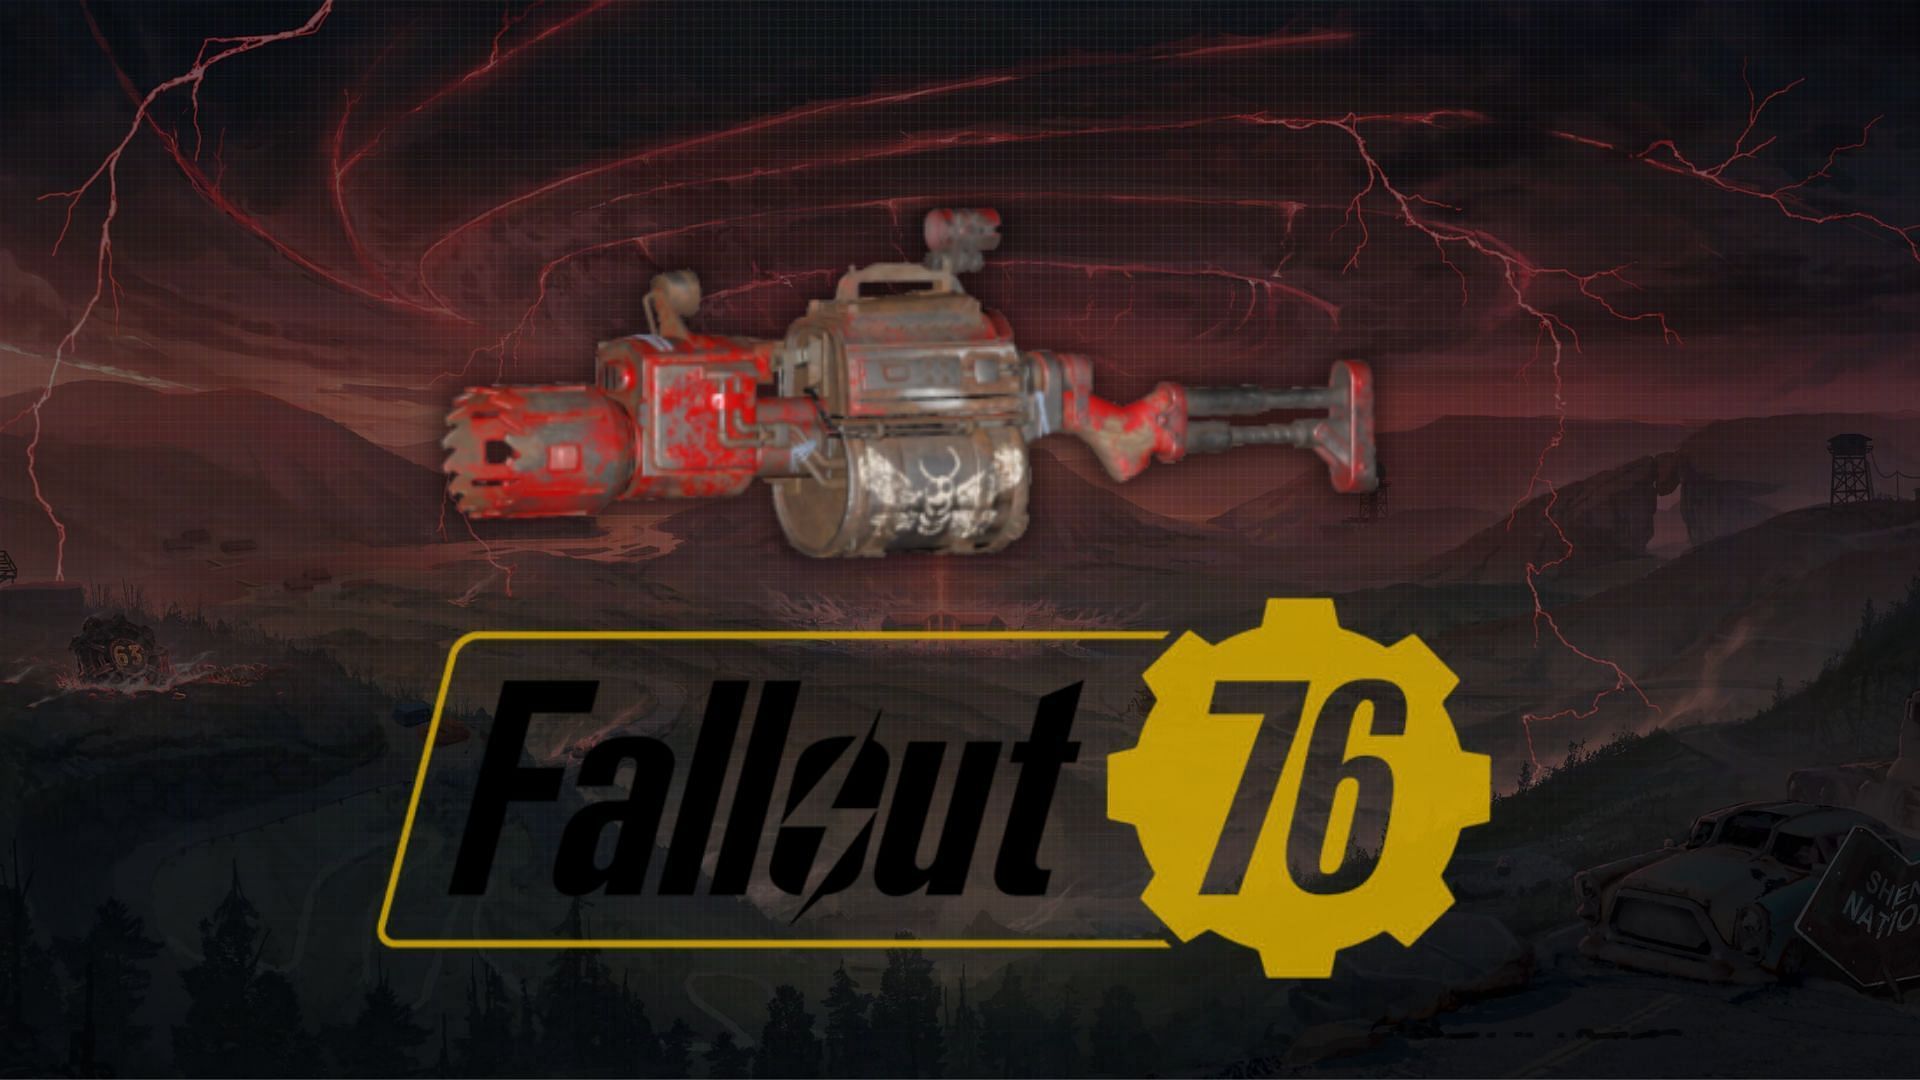 Ticket to Revenge in Fallout 76 (Image via Bethesda Game Studios)